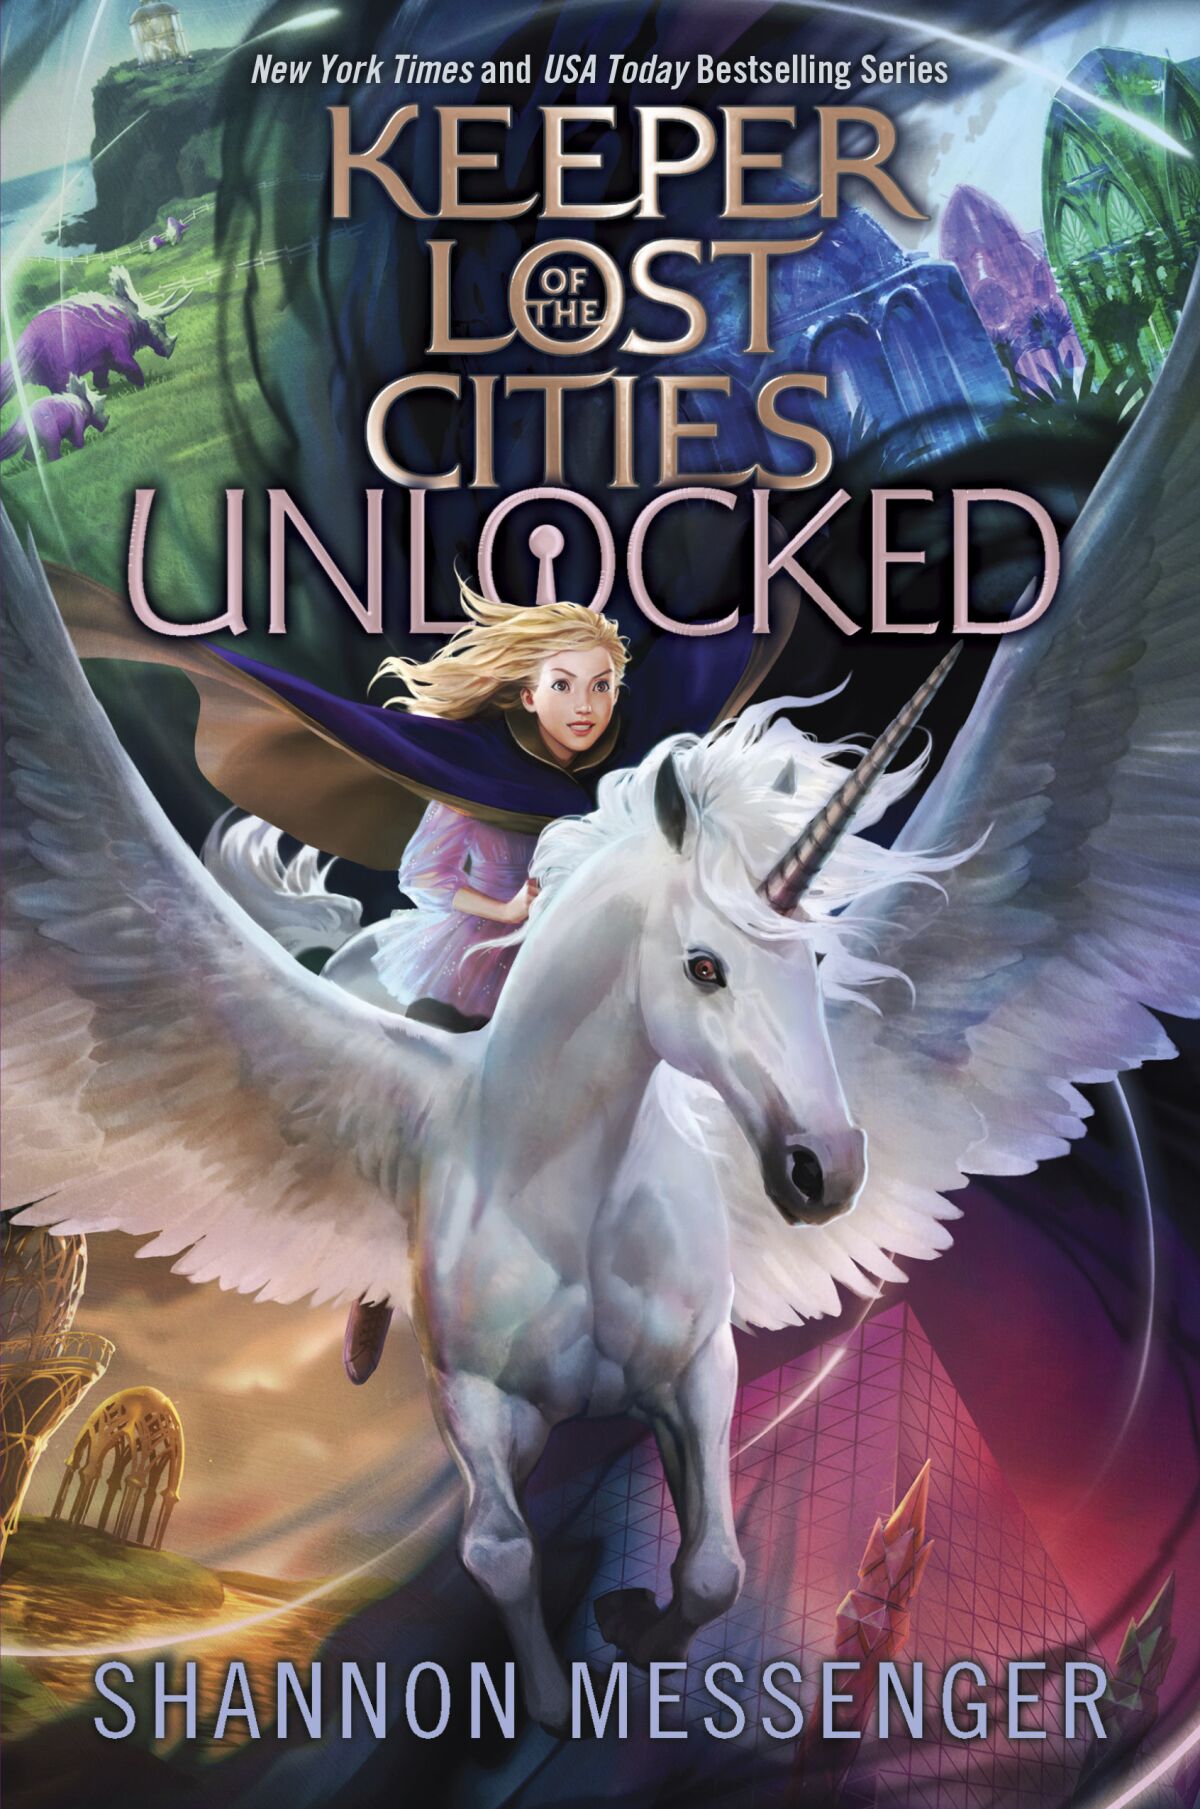 This image released by Simon & Schuster Children’s Publishing shows "Unlocked" a book in the "Keeper of the Lost Cities" series by Shannon Messenger. (Simon & Schuster Children’s Publishing via AP)